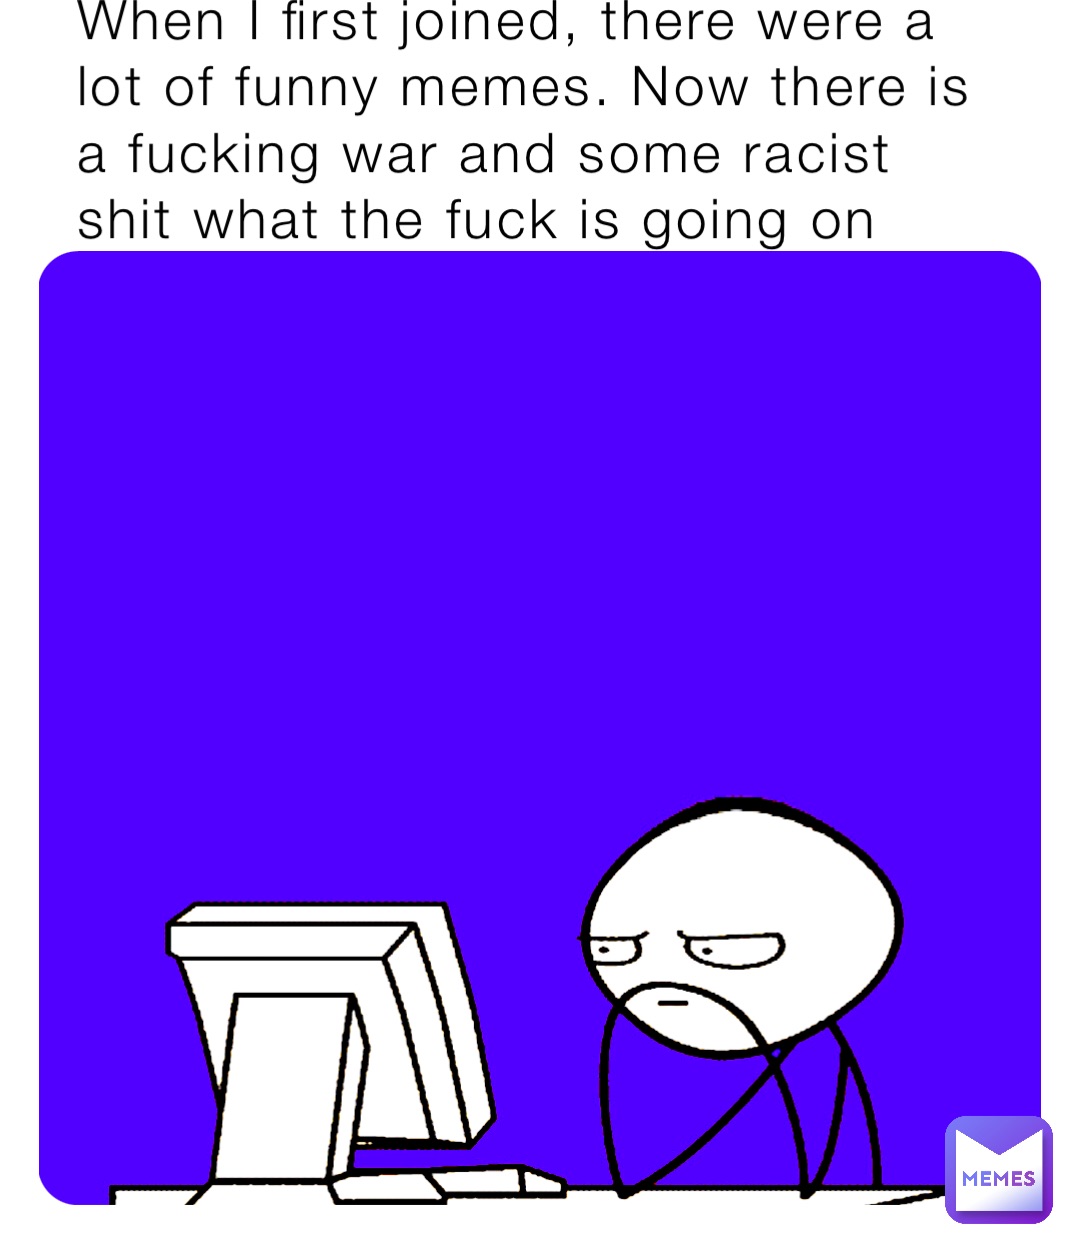 When I first joined, there were a lot of funny memes. Now there is a fucking war and some racist shit what the fuck is going on